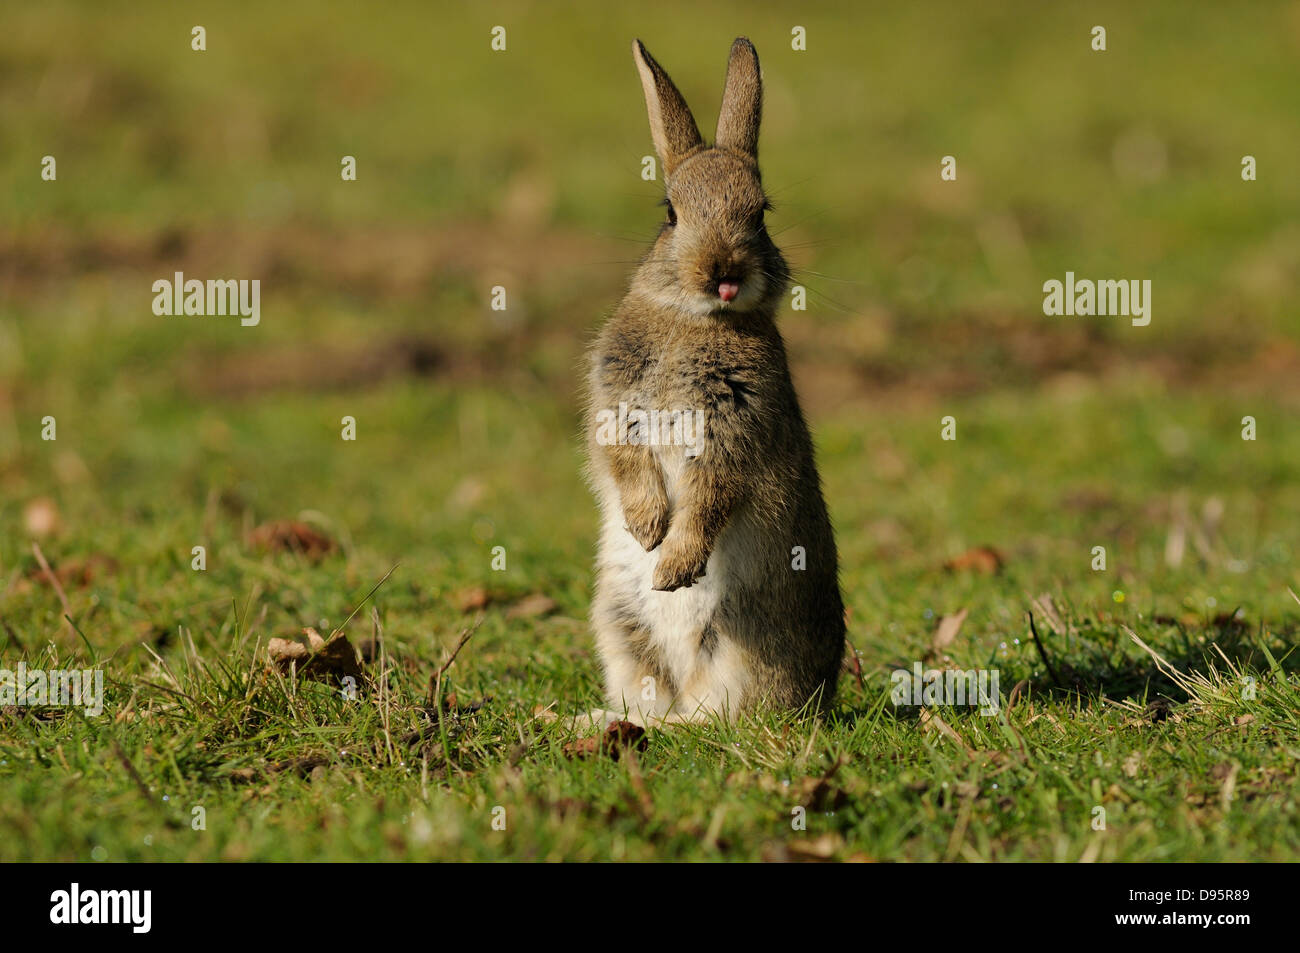 A rabbit on hind legs sticking its tongue out. Stock Photo